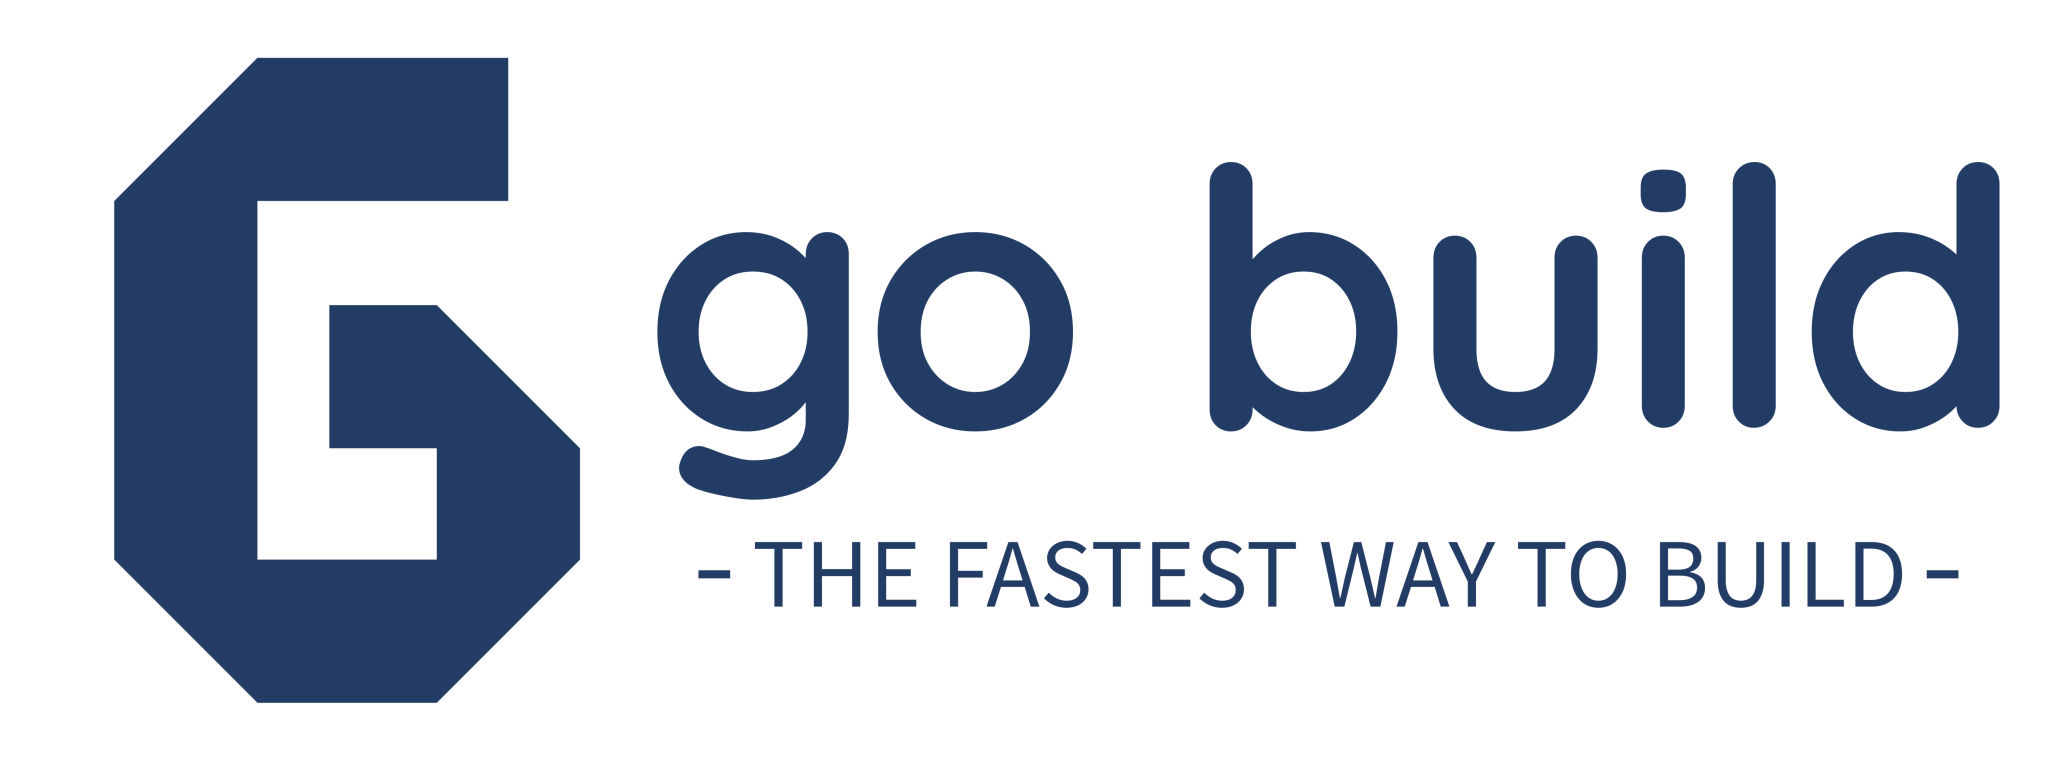 GO BUILD, THE FASTEST WAY TO BUILD